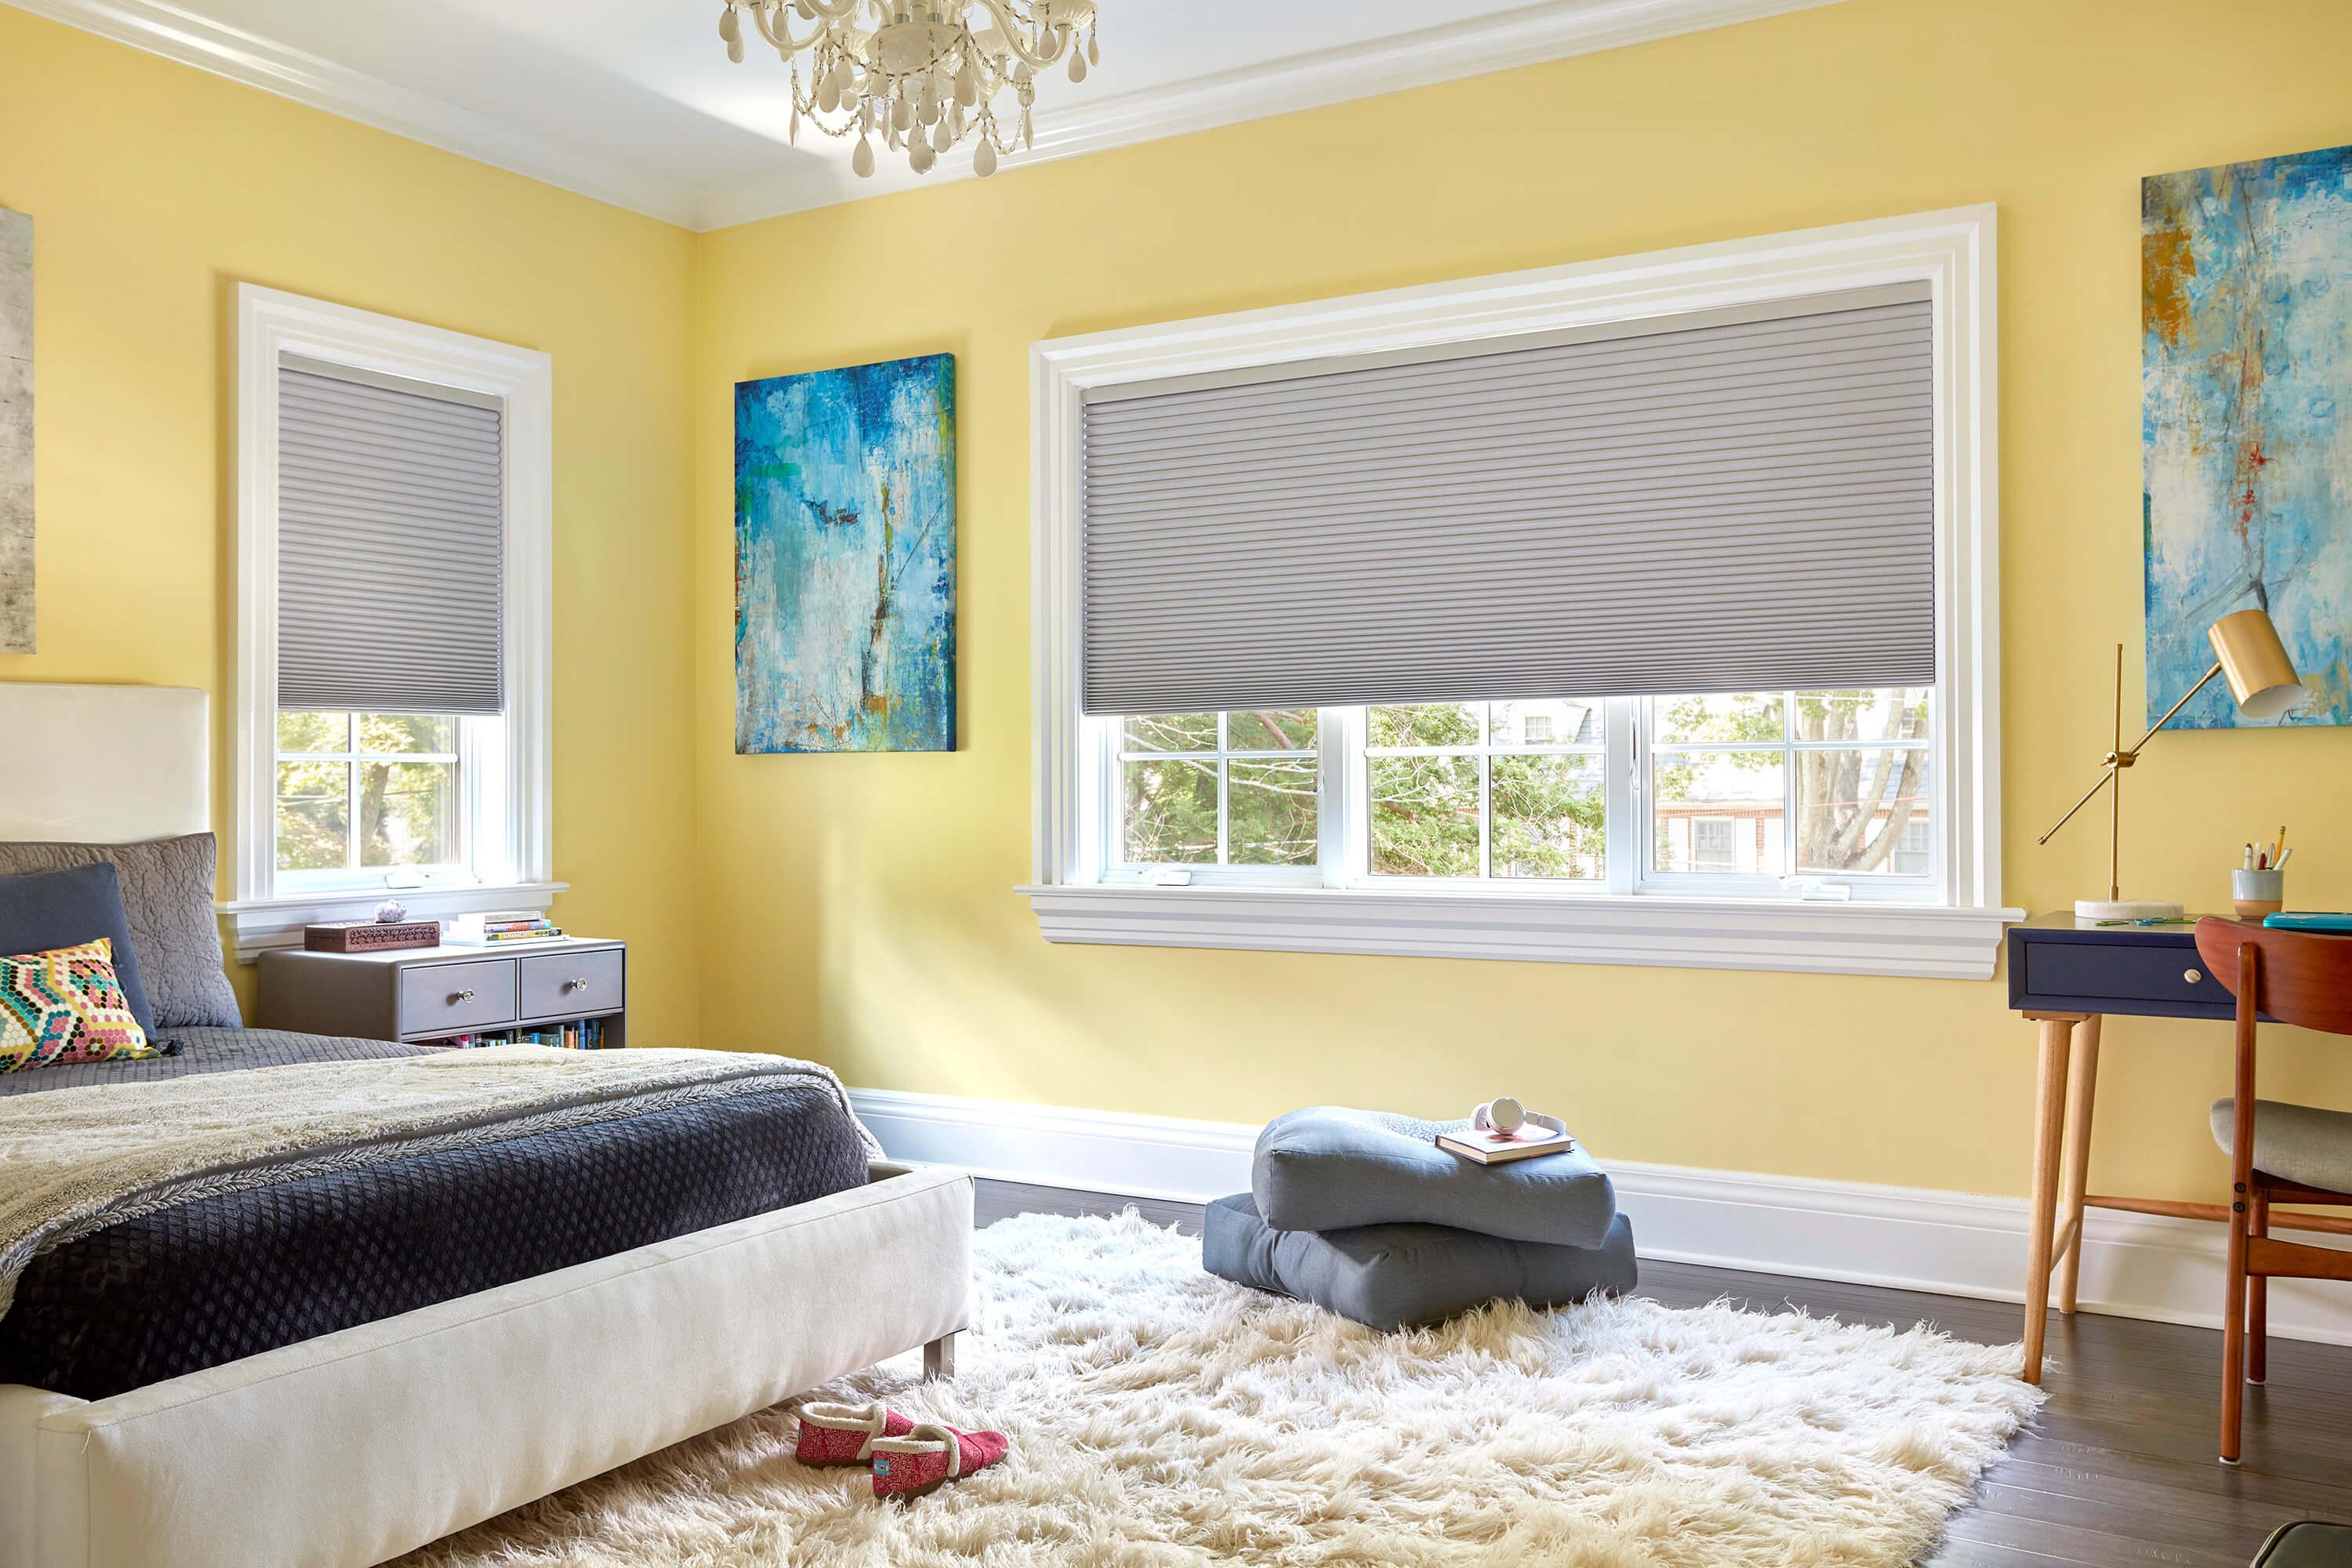 Showcasing cellular shades with top down bottom up option and blackout material